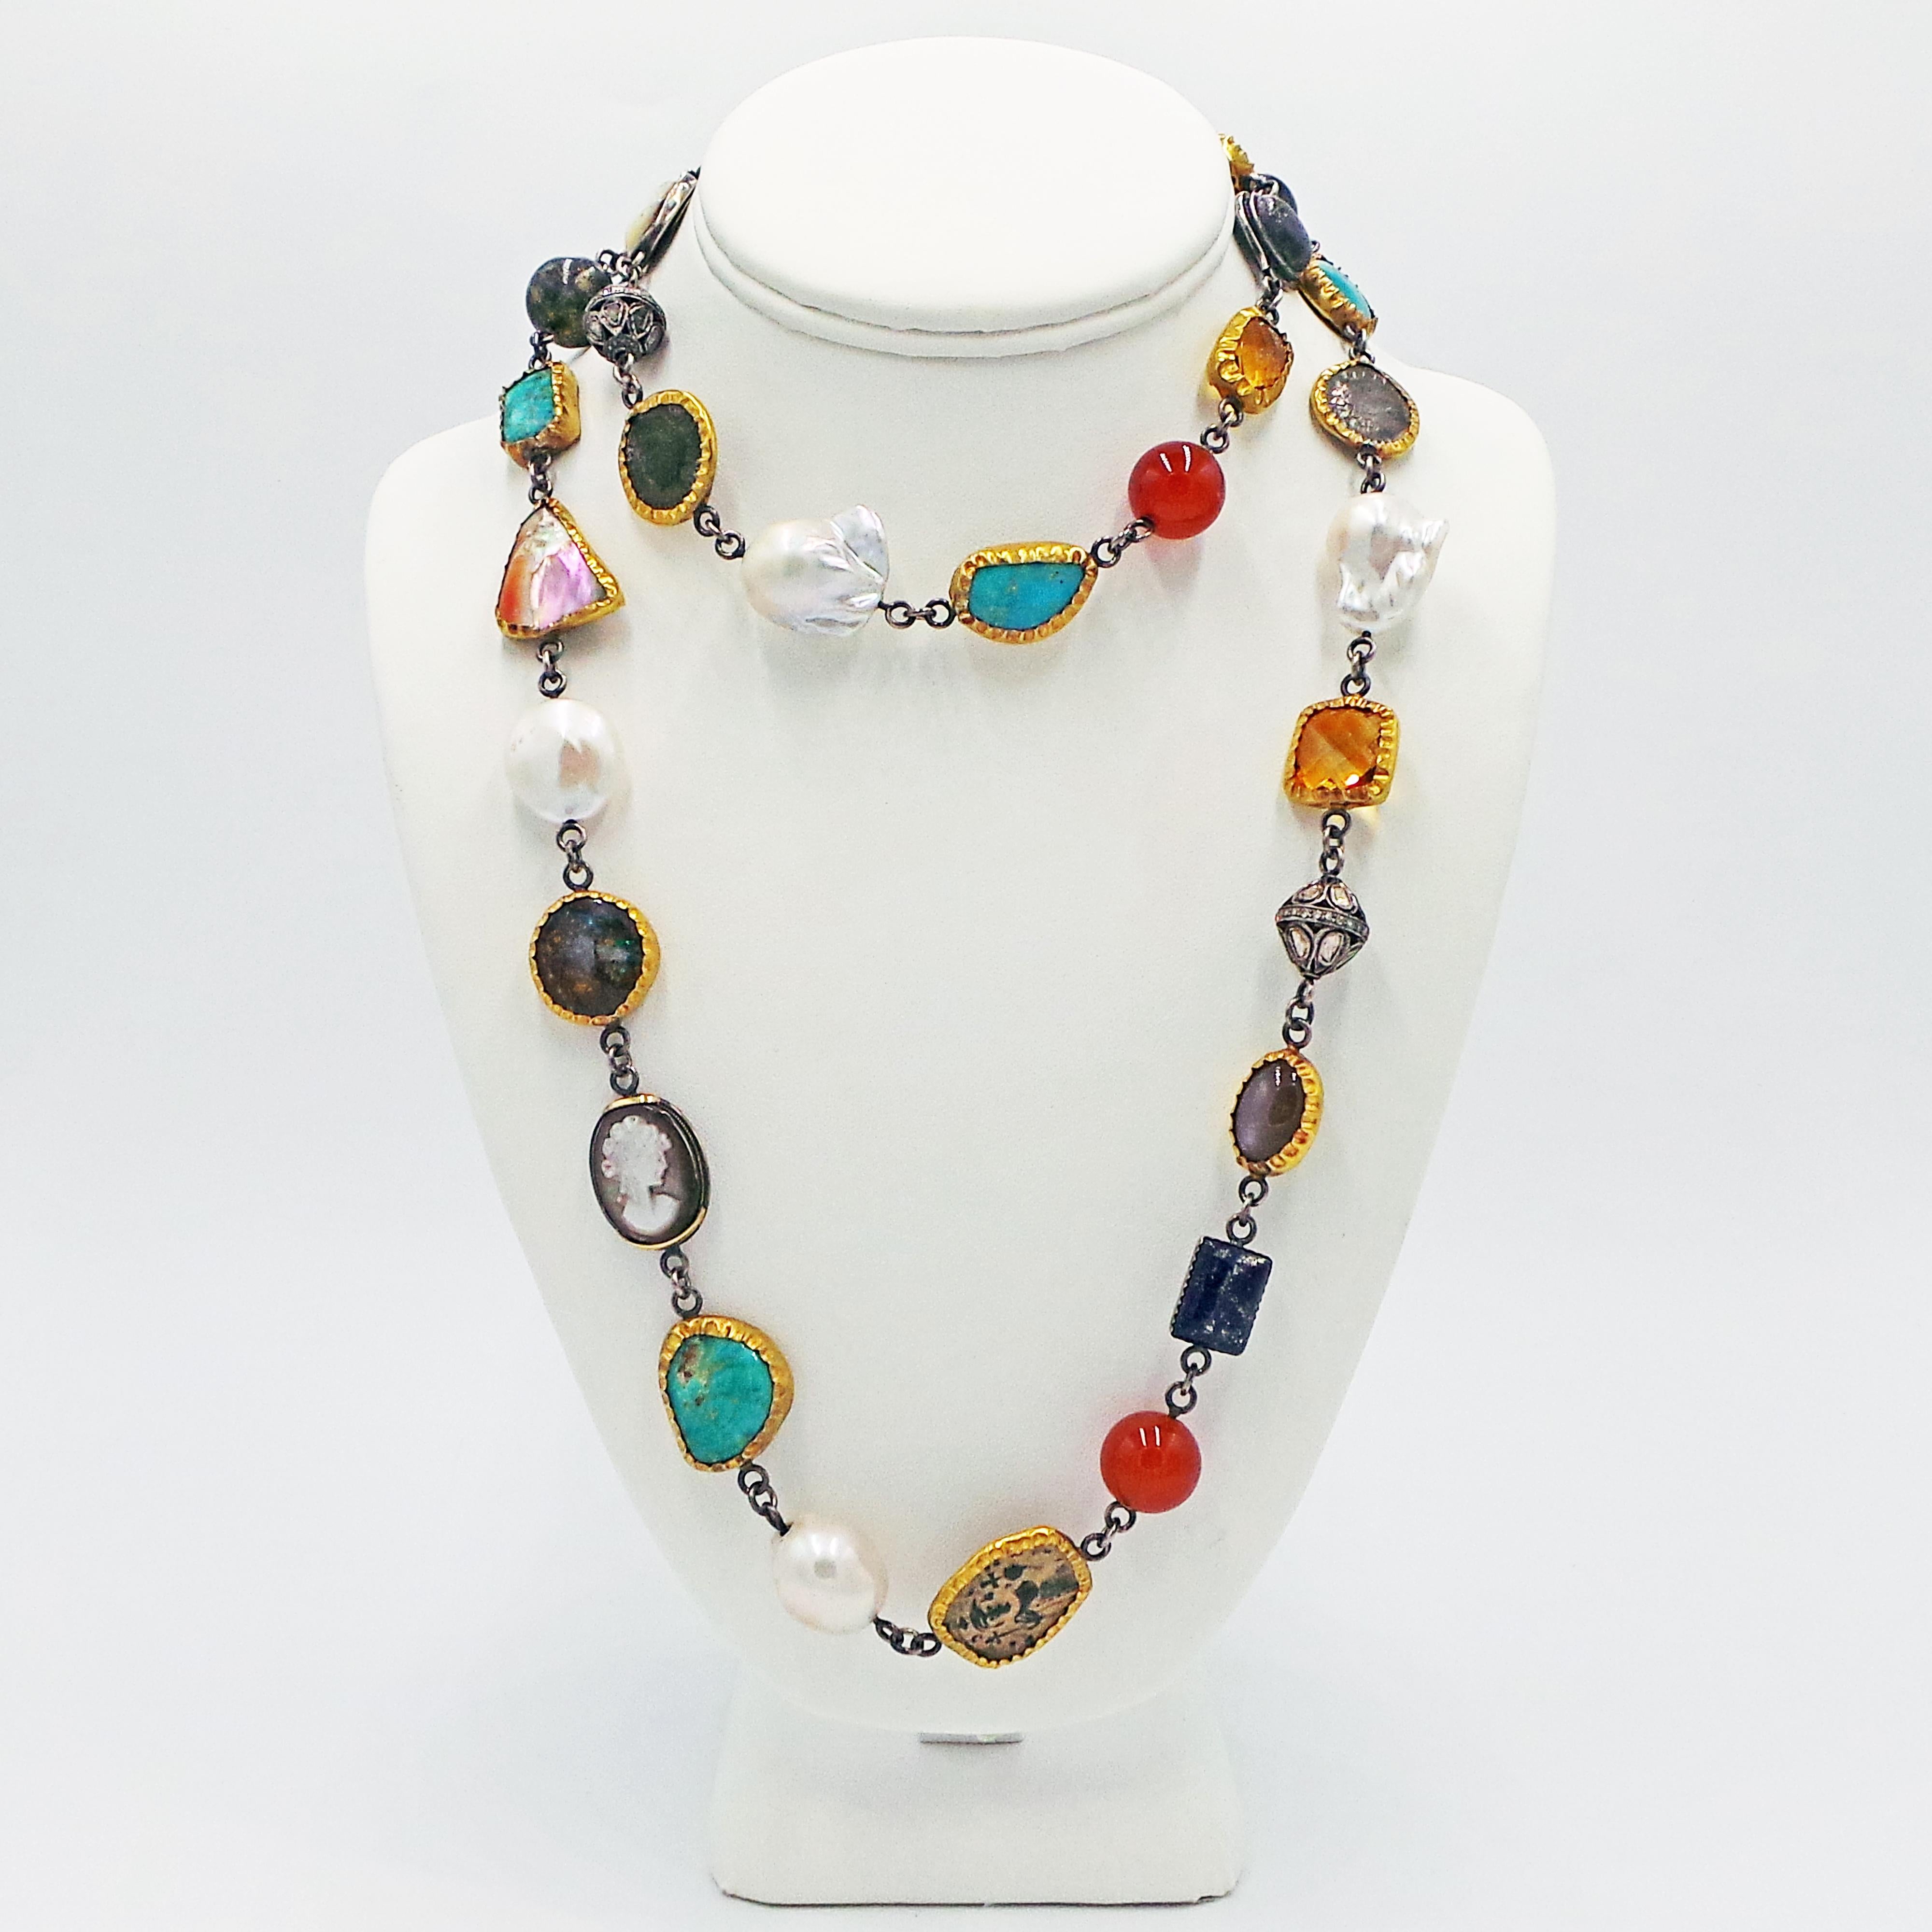 Gorgeous Bohemian style necklace links a variety of gemstones, ancient Byzantine, Greek and Roman coins, pearls, vintage cameos and rose-cut diamond beads. This stunning necklace has a total of 32 pieces.  Sixteen pieces are wrapped with 24k yellow